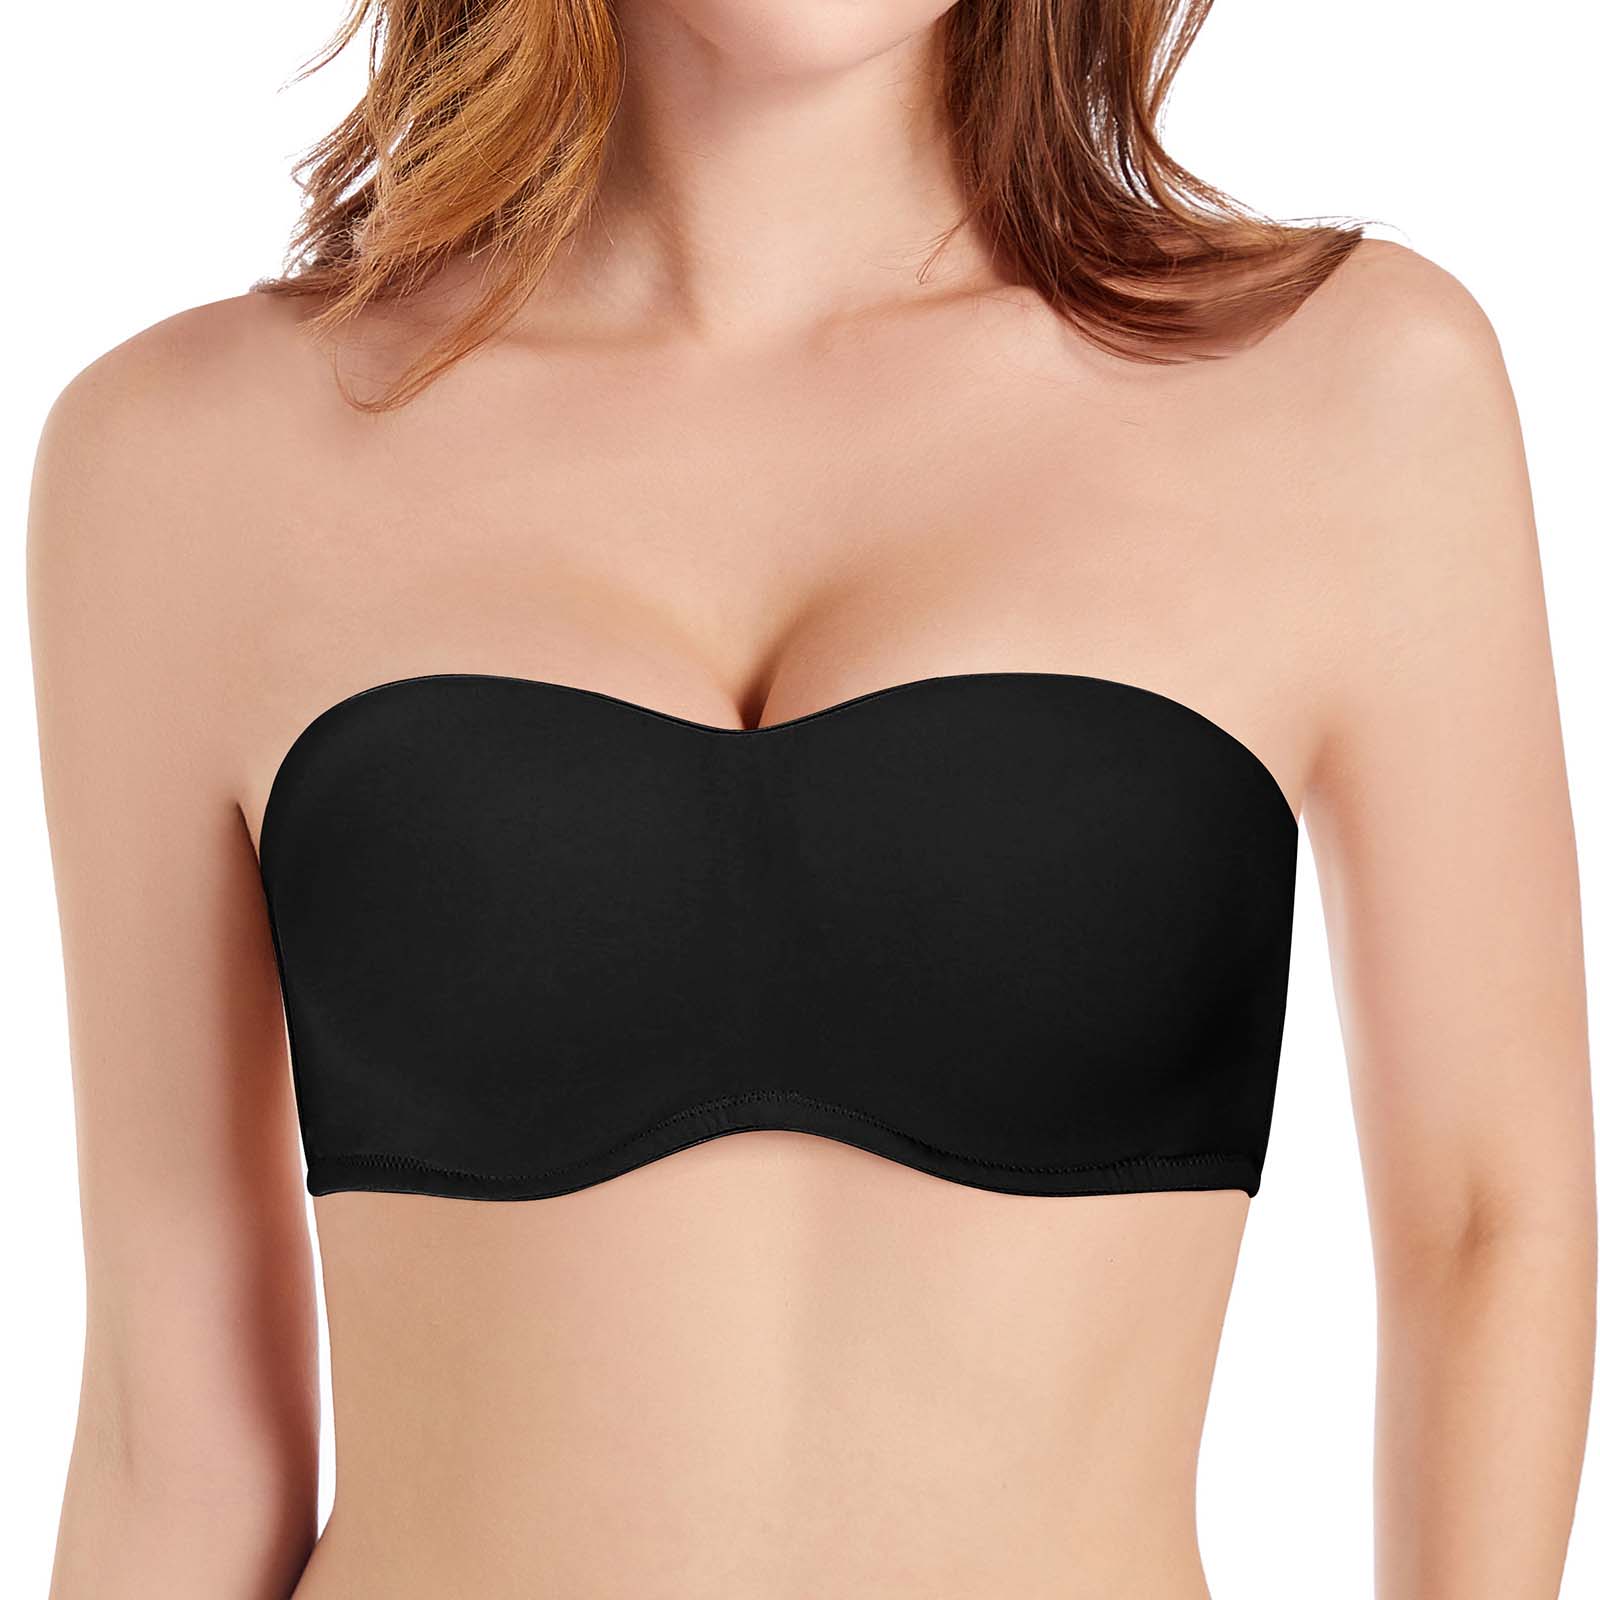 Women's Strapless Bandeau Bra with Clear Straps Multiway Removable Pads  Plus Size Bras for Large Bust